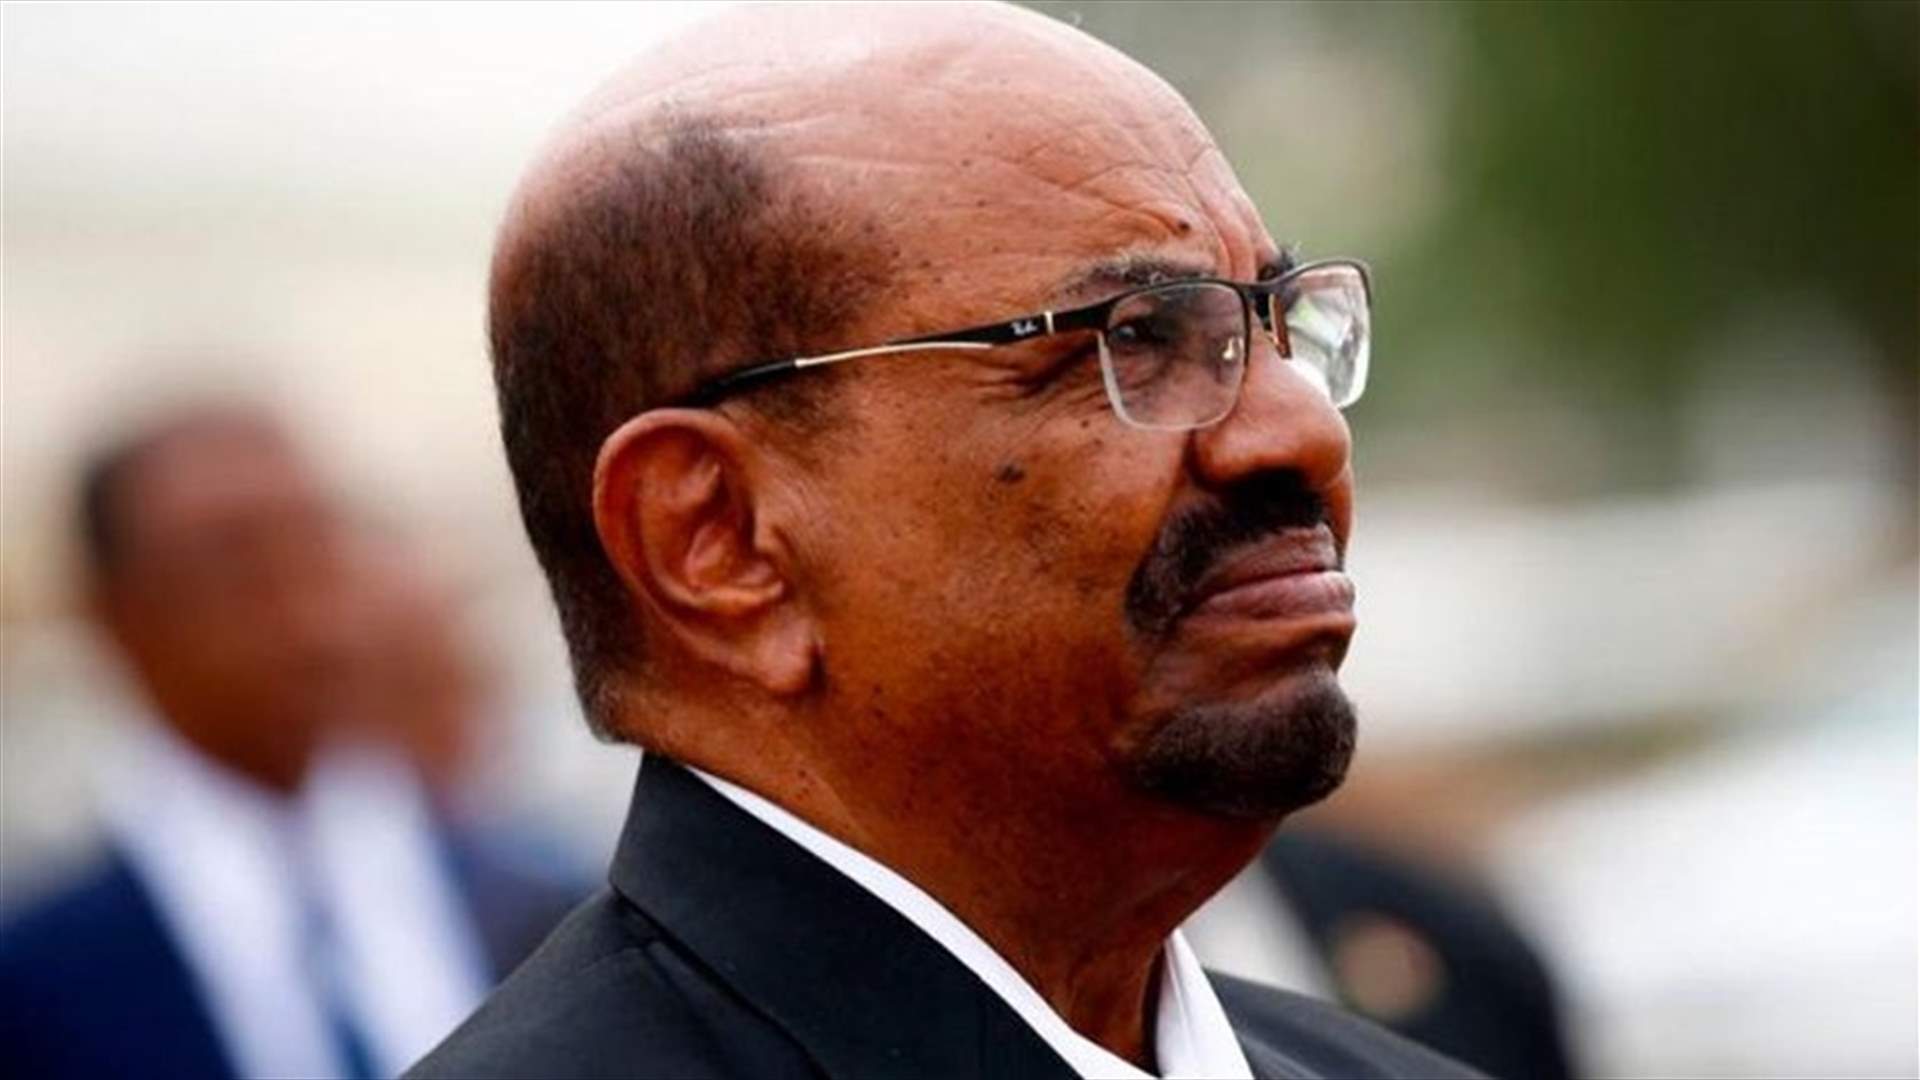 Sudan investigating Bashir after large sums of cash found at home- source